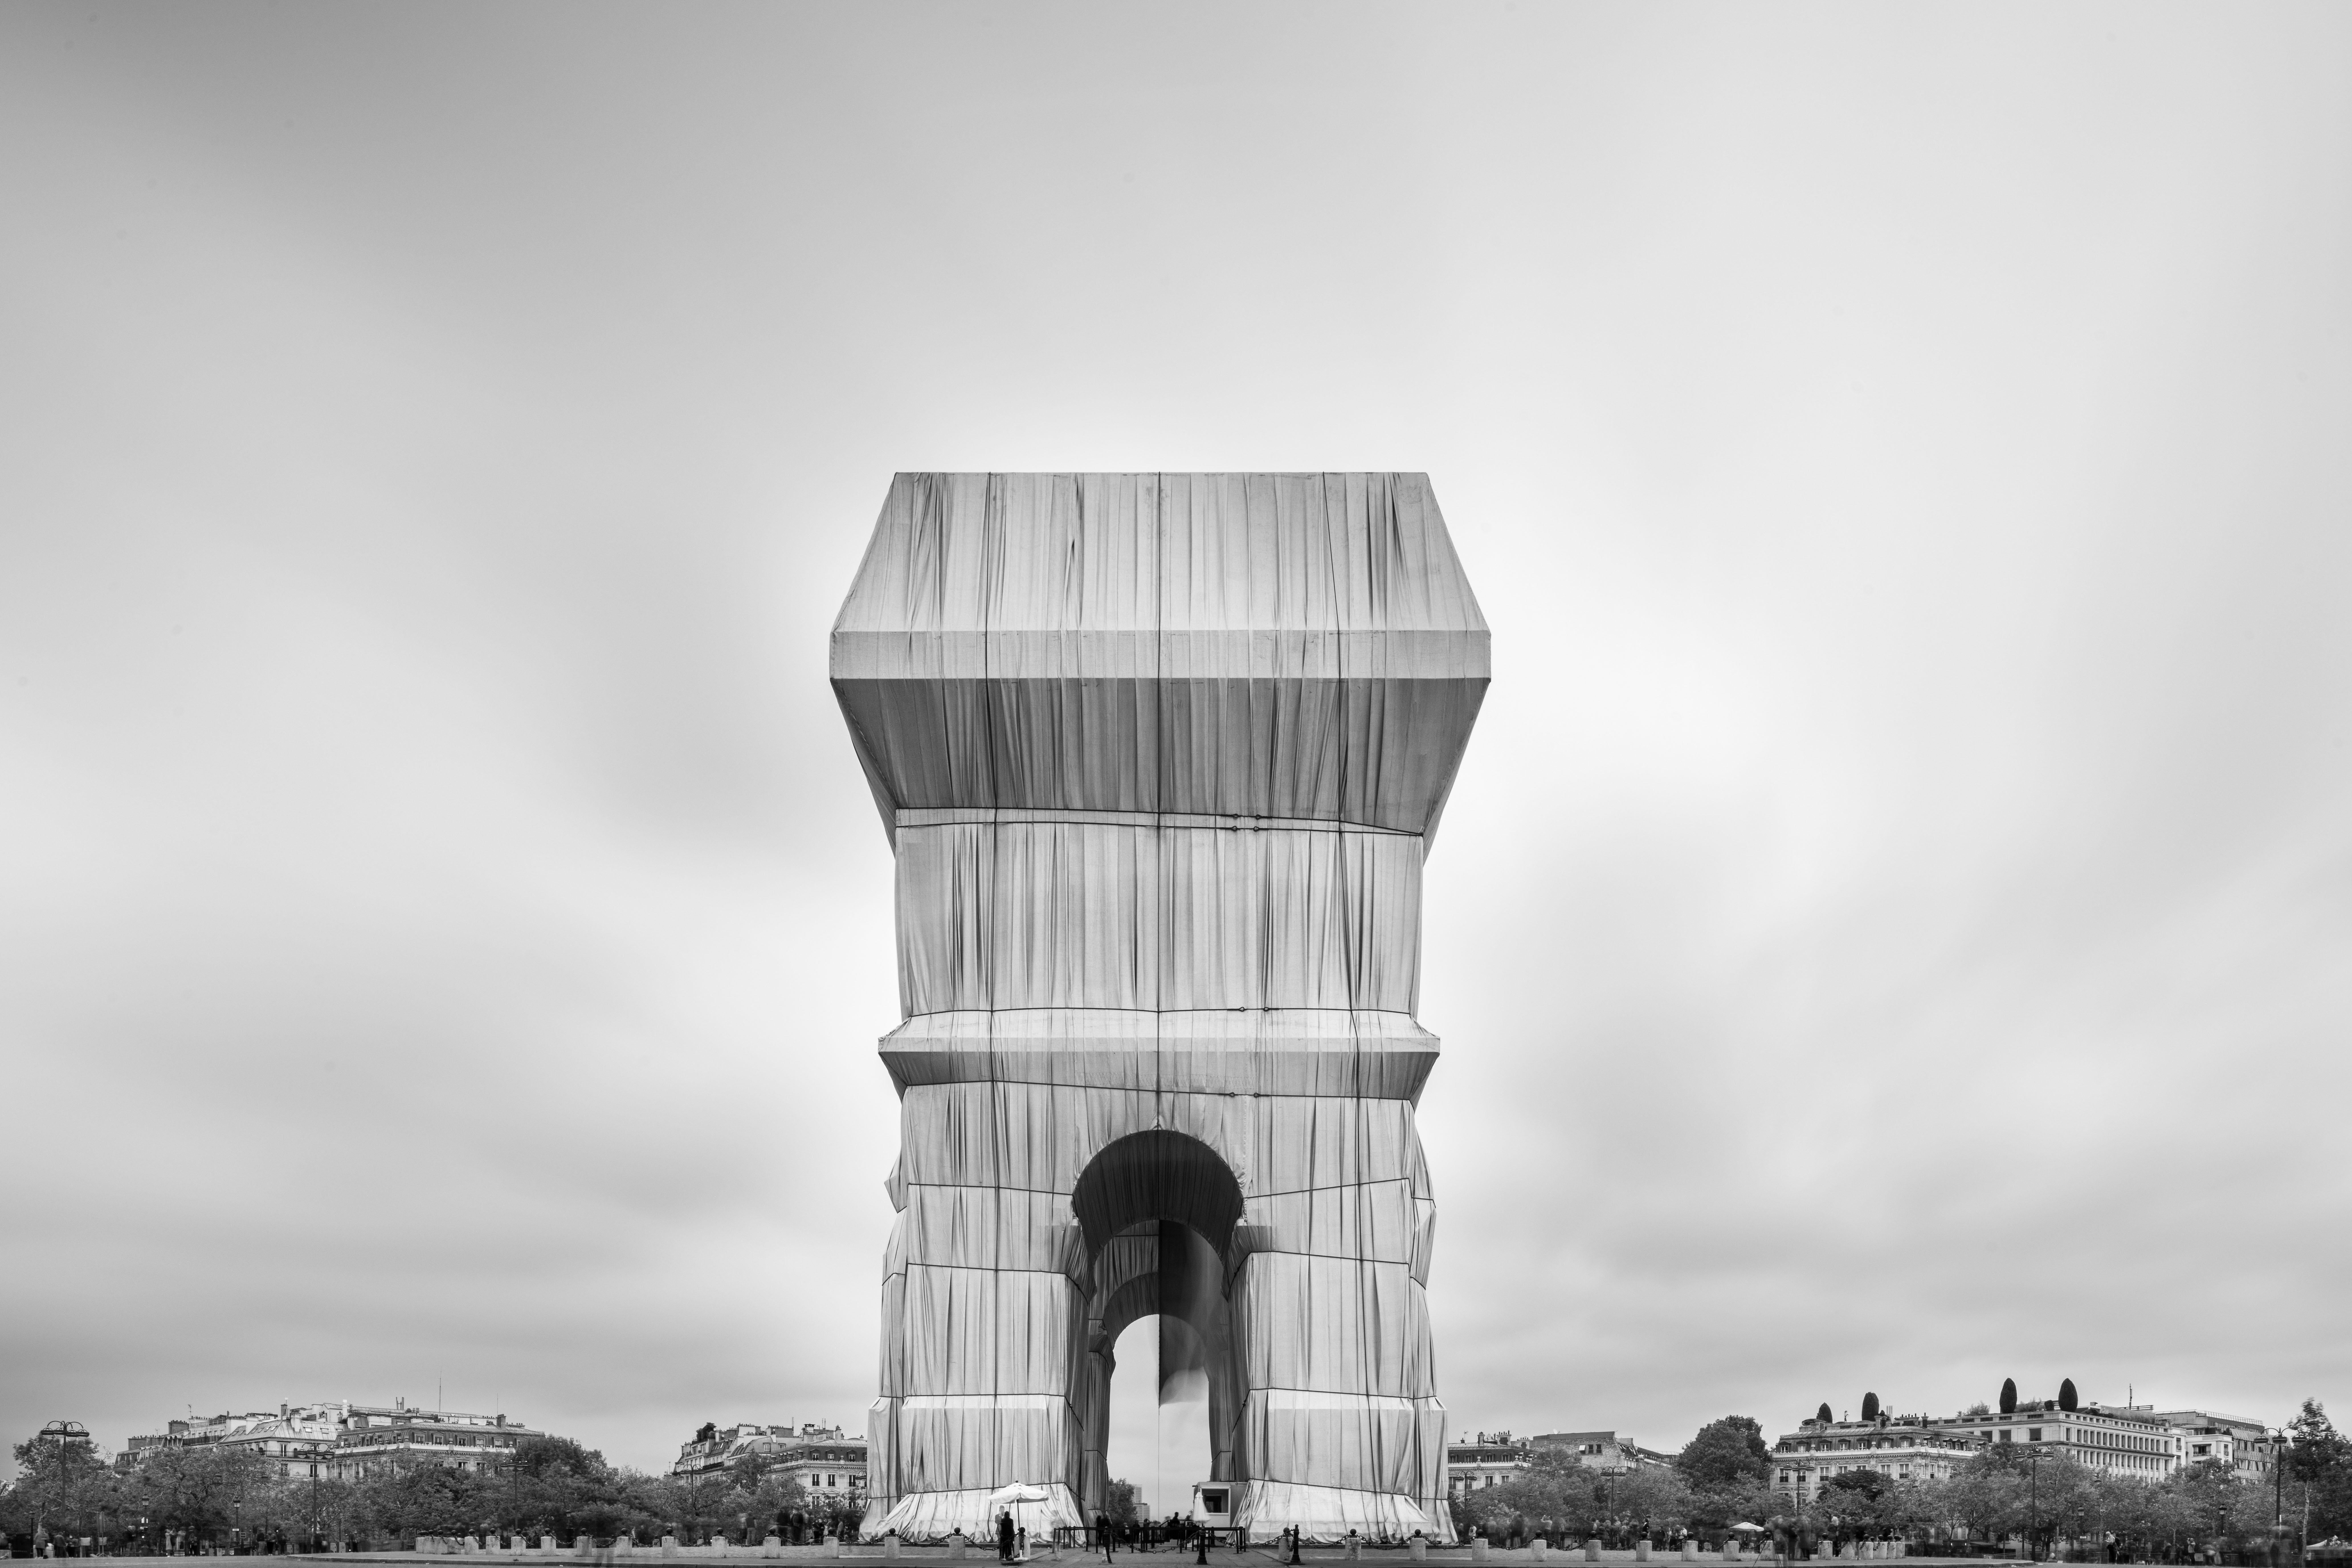 Photographic Fine Art Paper 325 g, ed. 3/7. Artwork can be shipped in a tube or in a crate if frame is requested

Luca Battaglia is an Italian architect and photographer born in 1970 who lives and works in Paris, France. Luca met the Italian